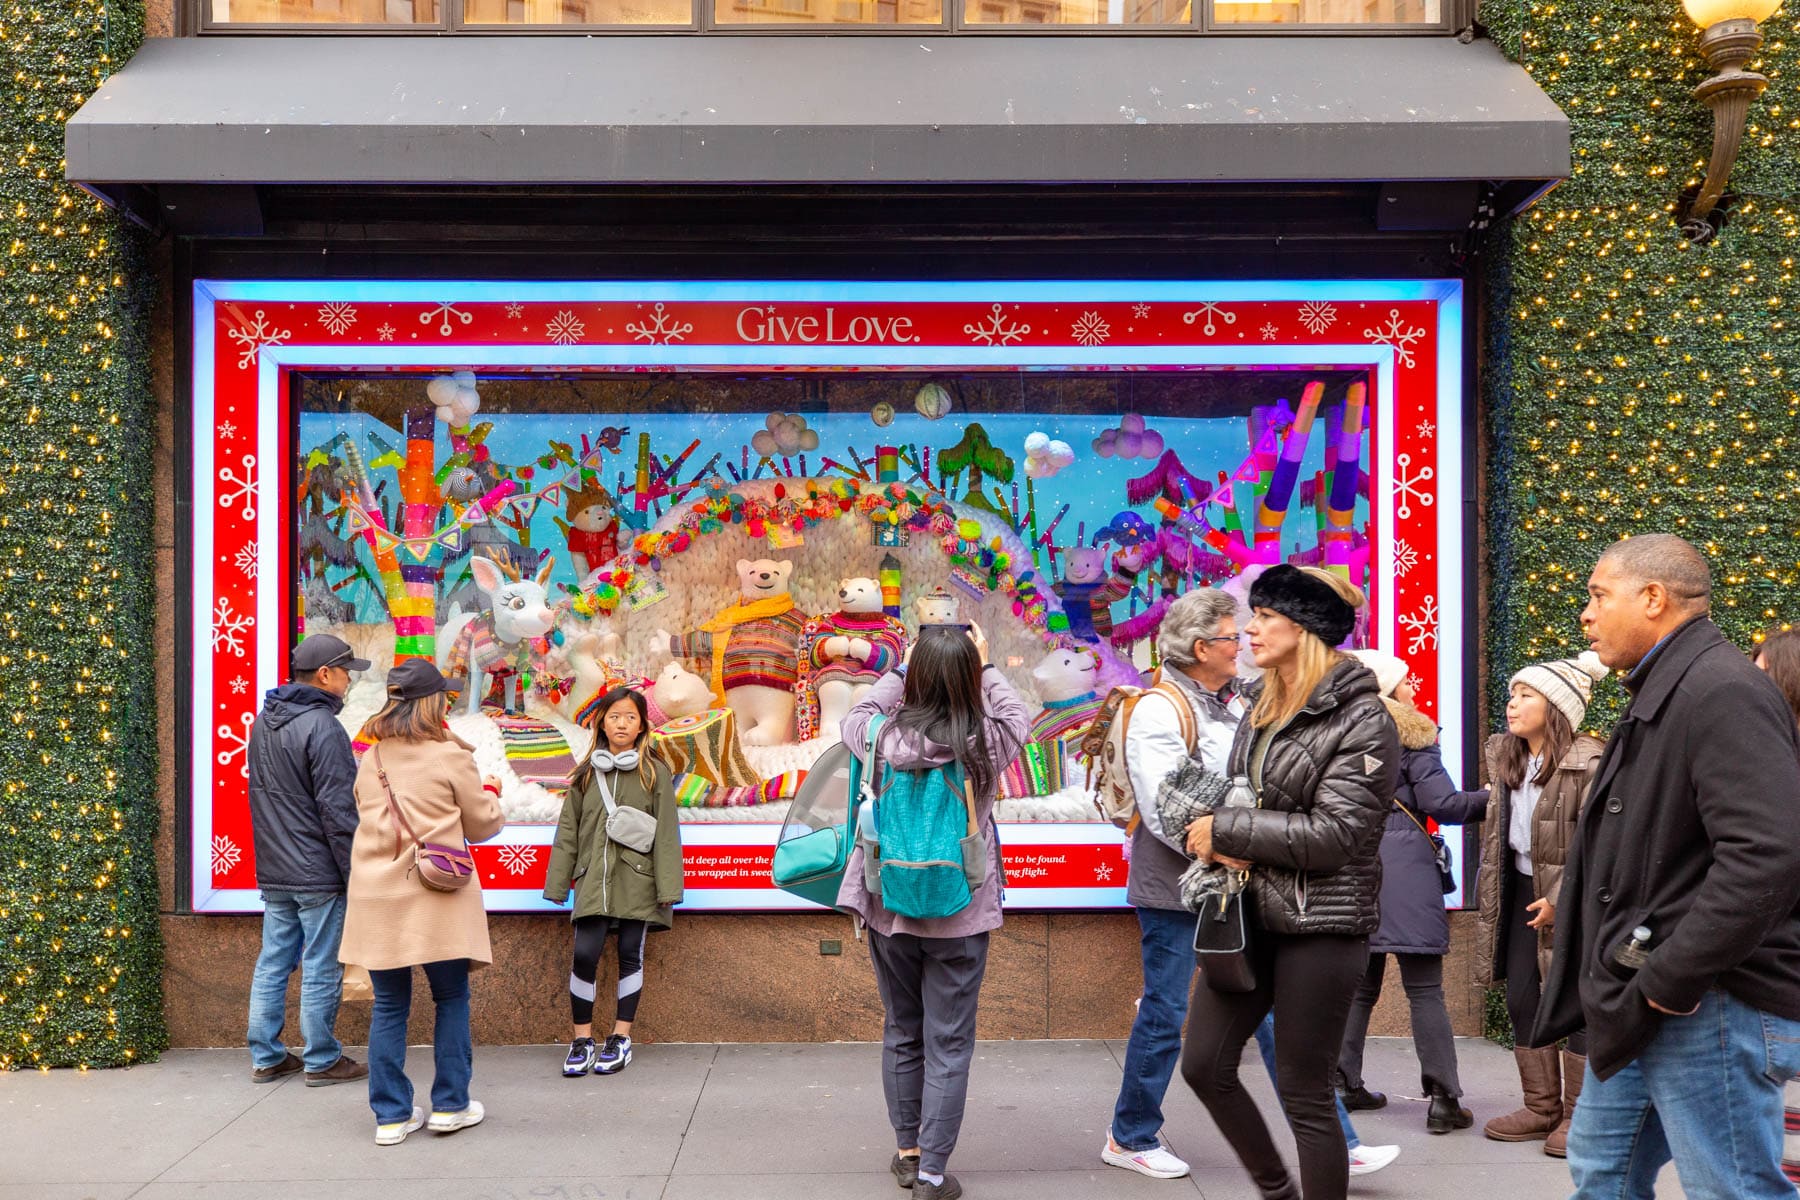 Macy's Herald Square Christmas Window Displays
free things to do during Christmas in New York City